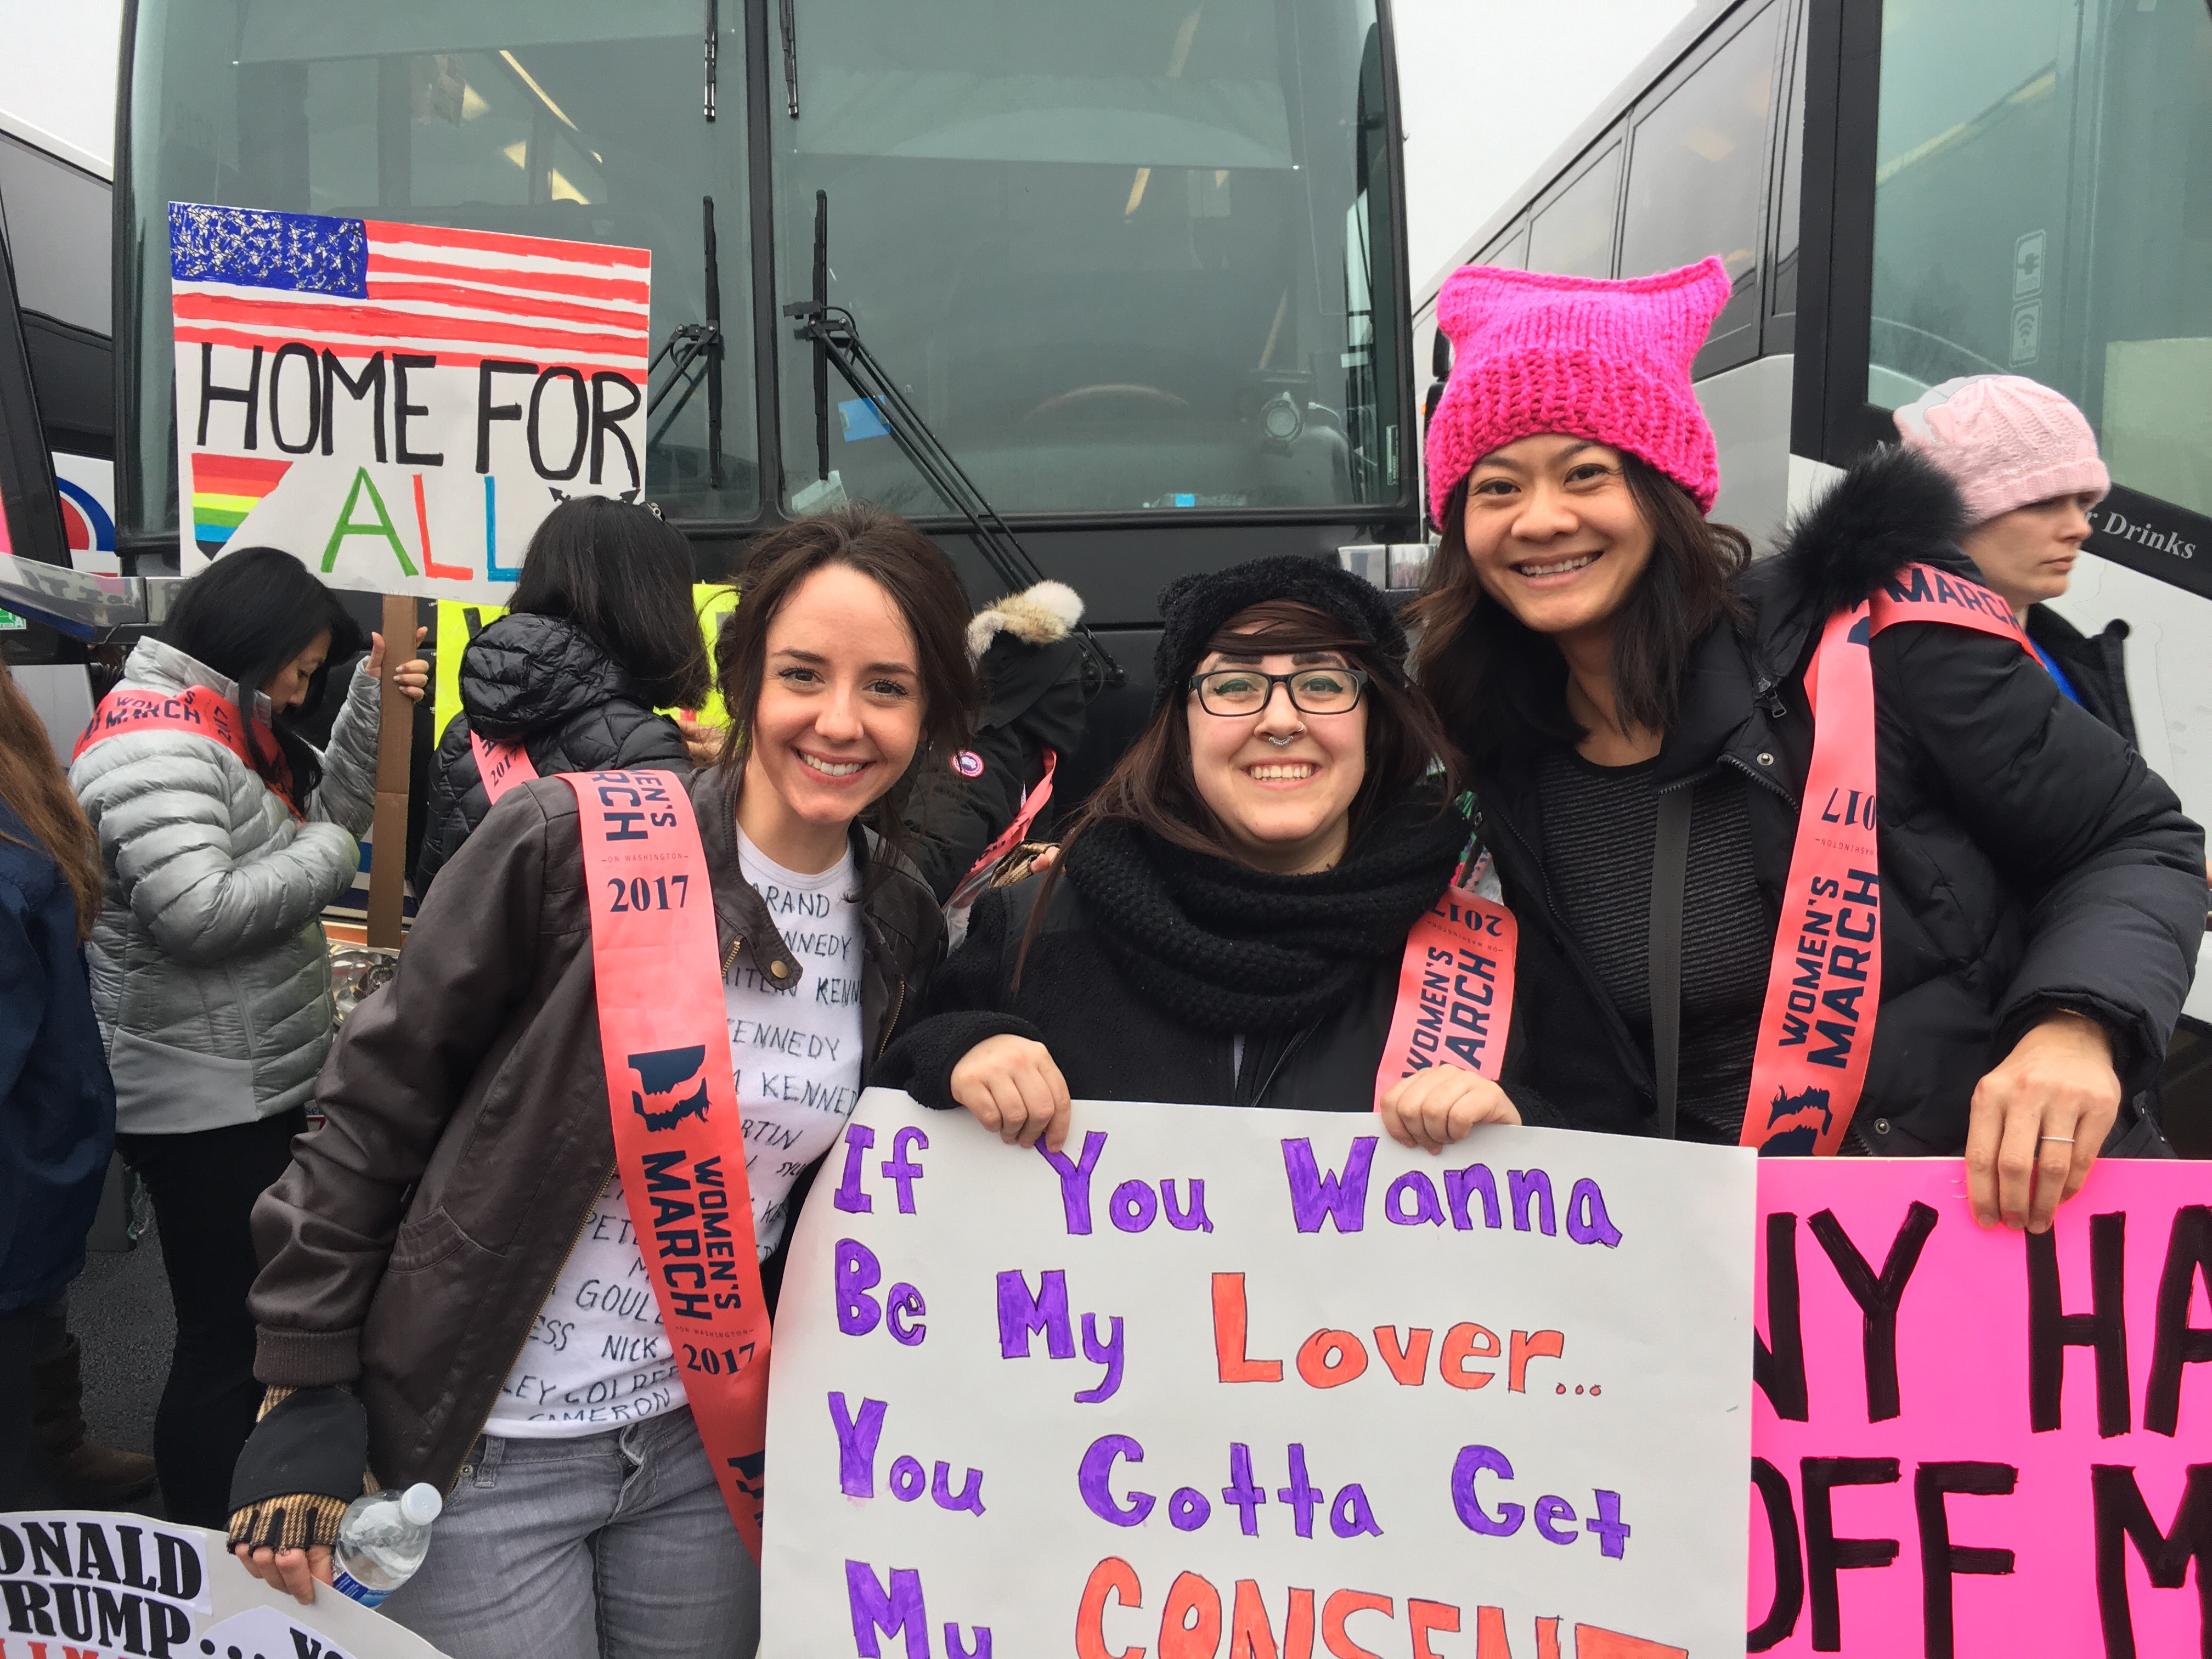 women-s-march-on-washington-2017-sashes.-signs-of-women-expressing-themselves-with-smiles-on-their-faces-.jpg